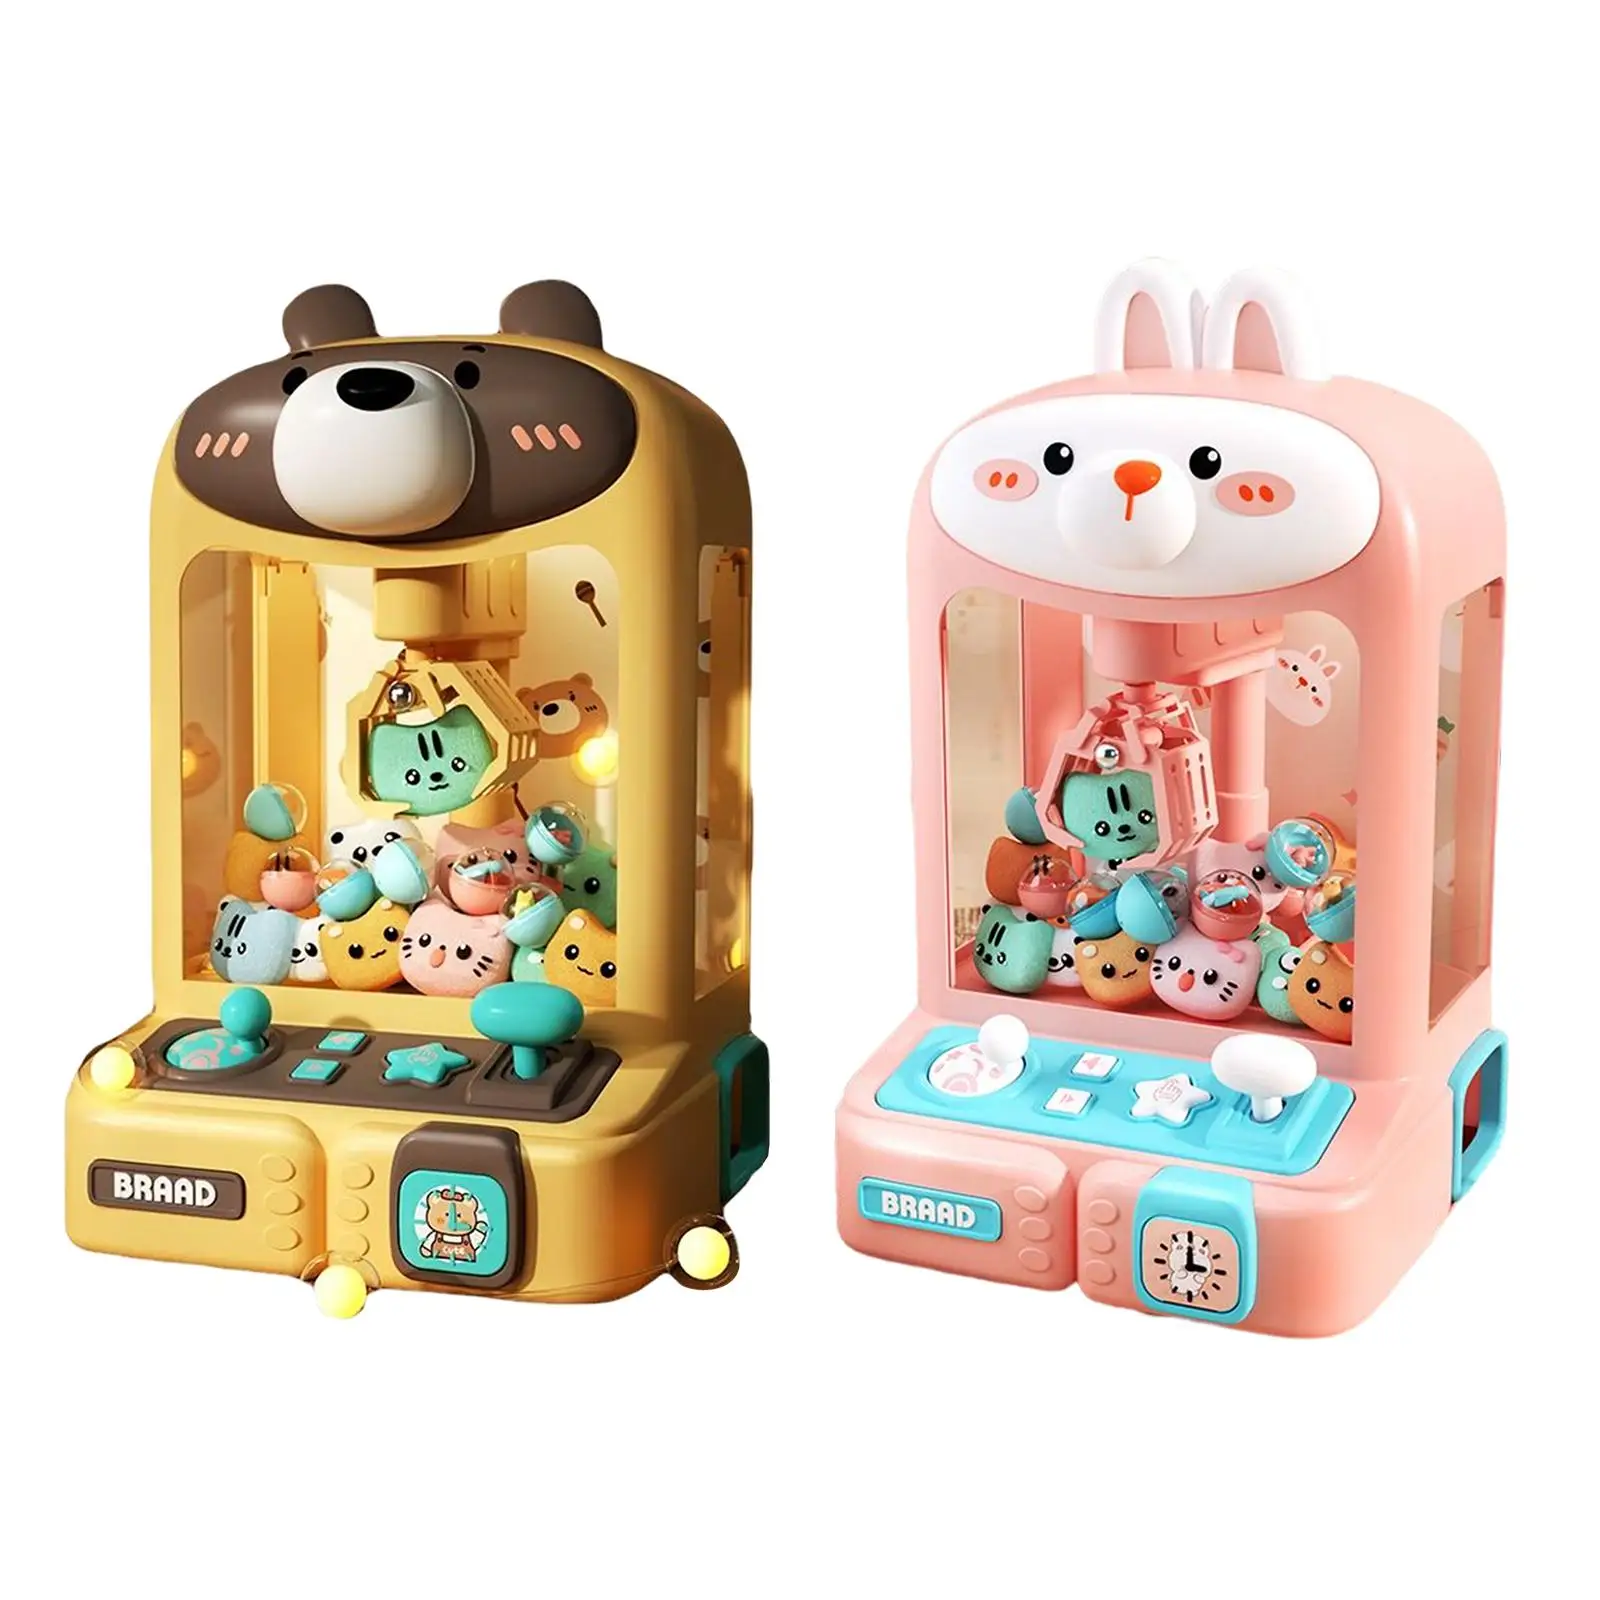 

Claw Machine Arcade Game Electronic Small Toys Mini Vending Machine Arcade Candy Capsule Claw Game Prizes Toy for Boys Girls